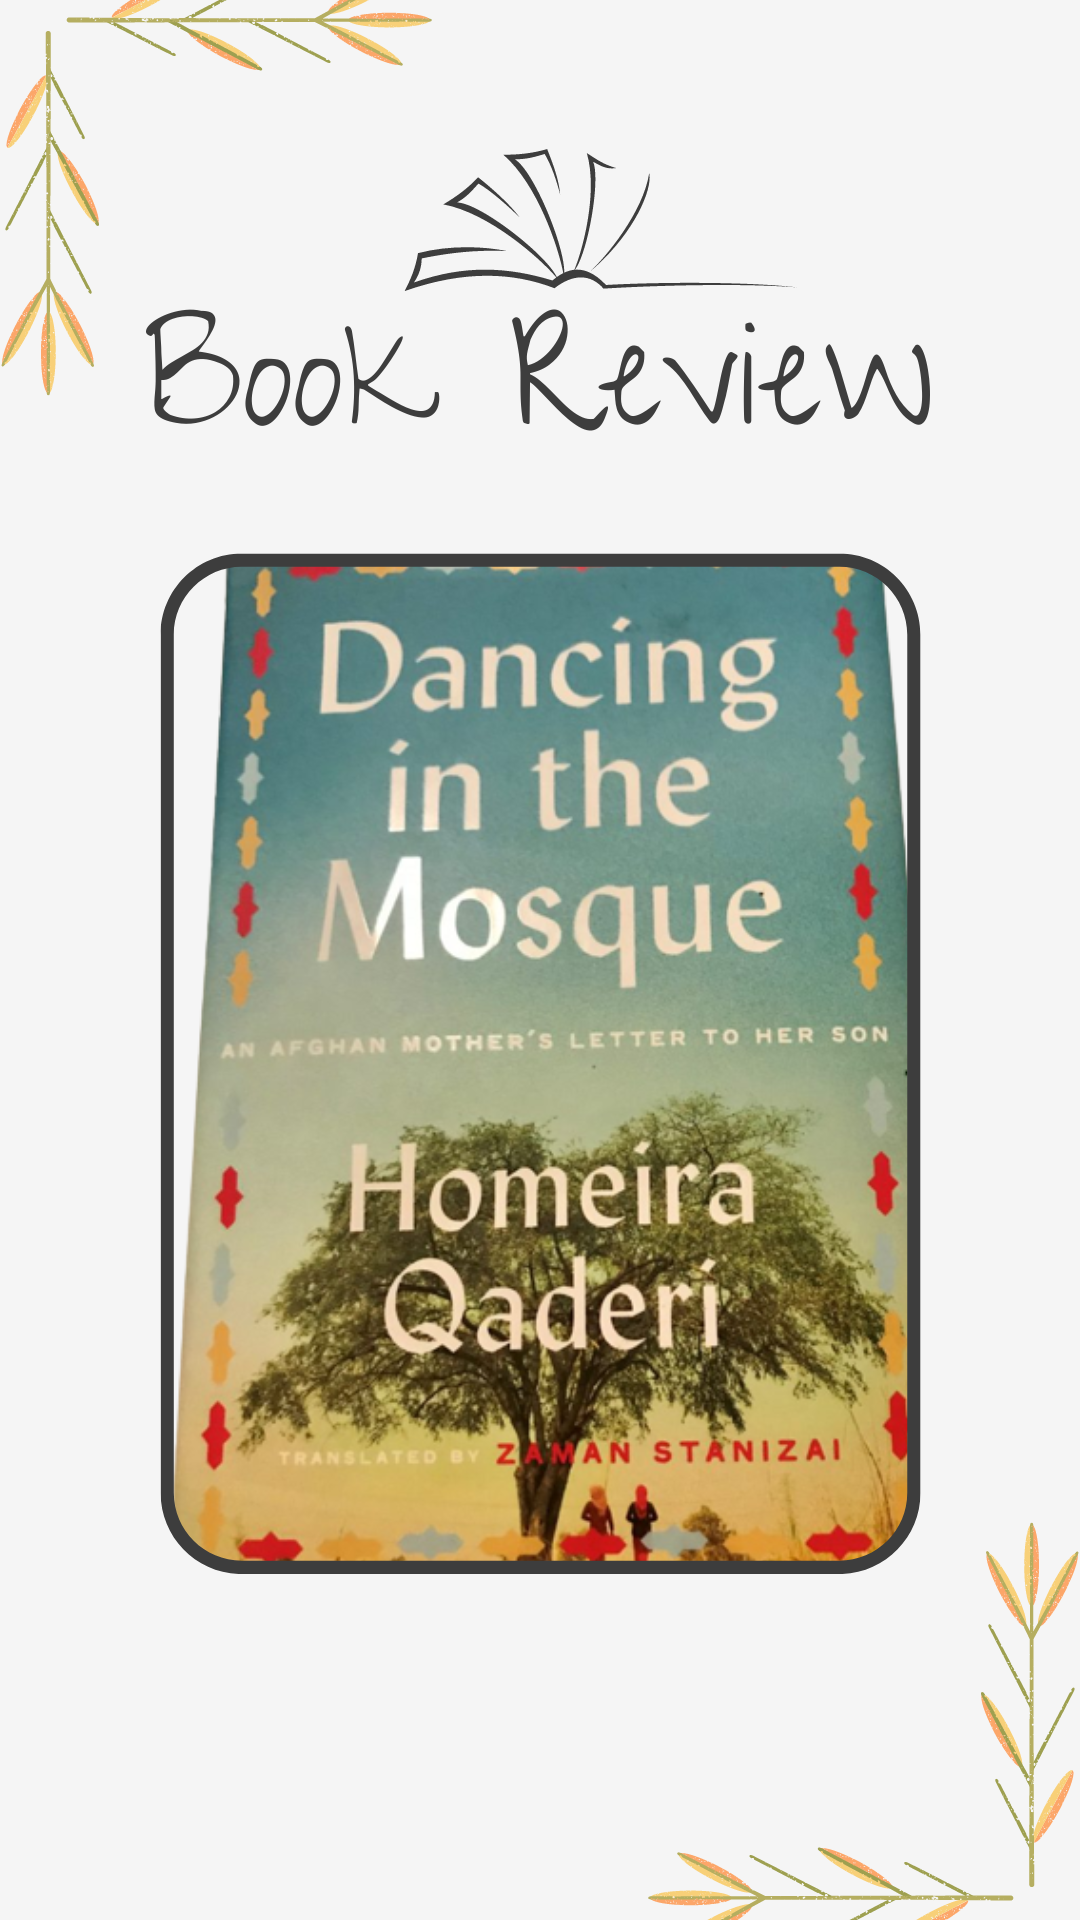 BOOK REVIEW : DANCING IN THE MOSQUE